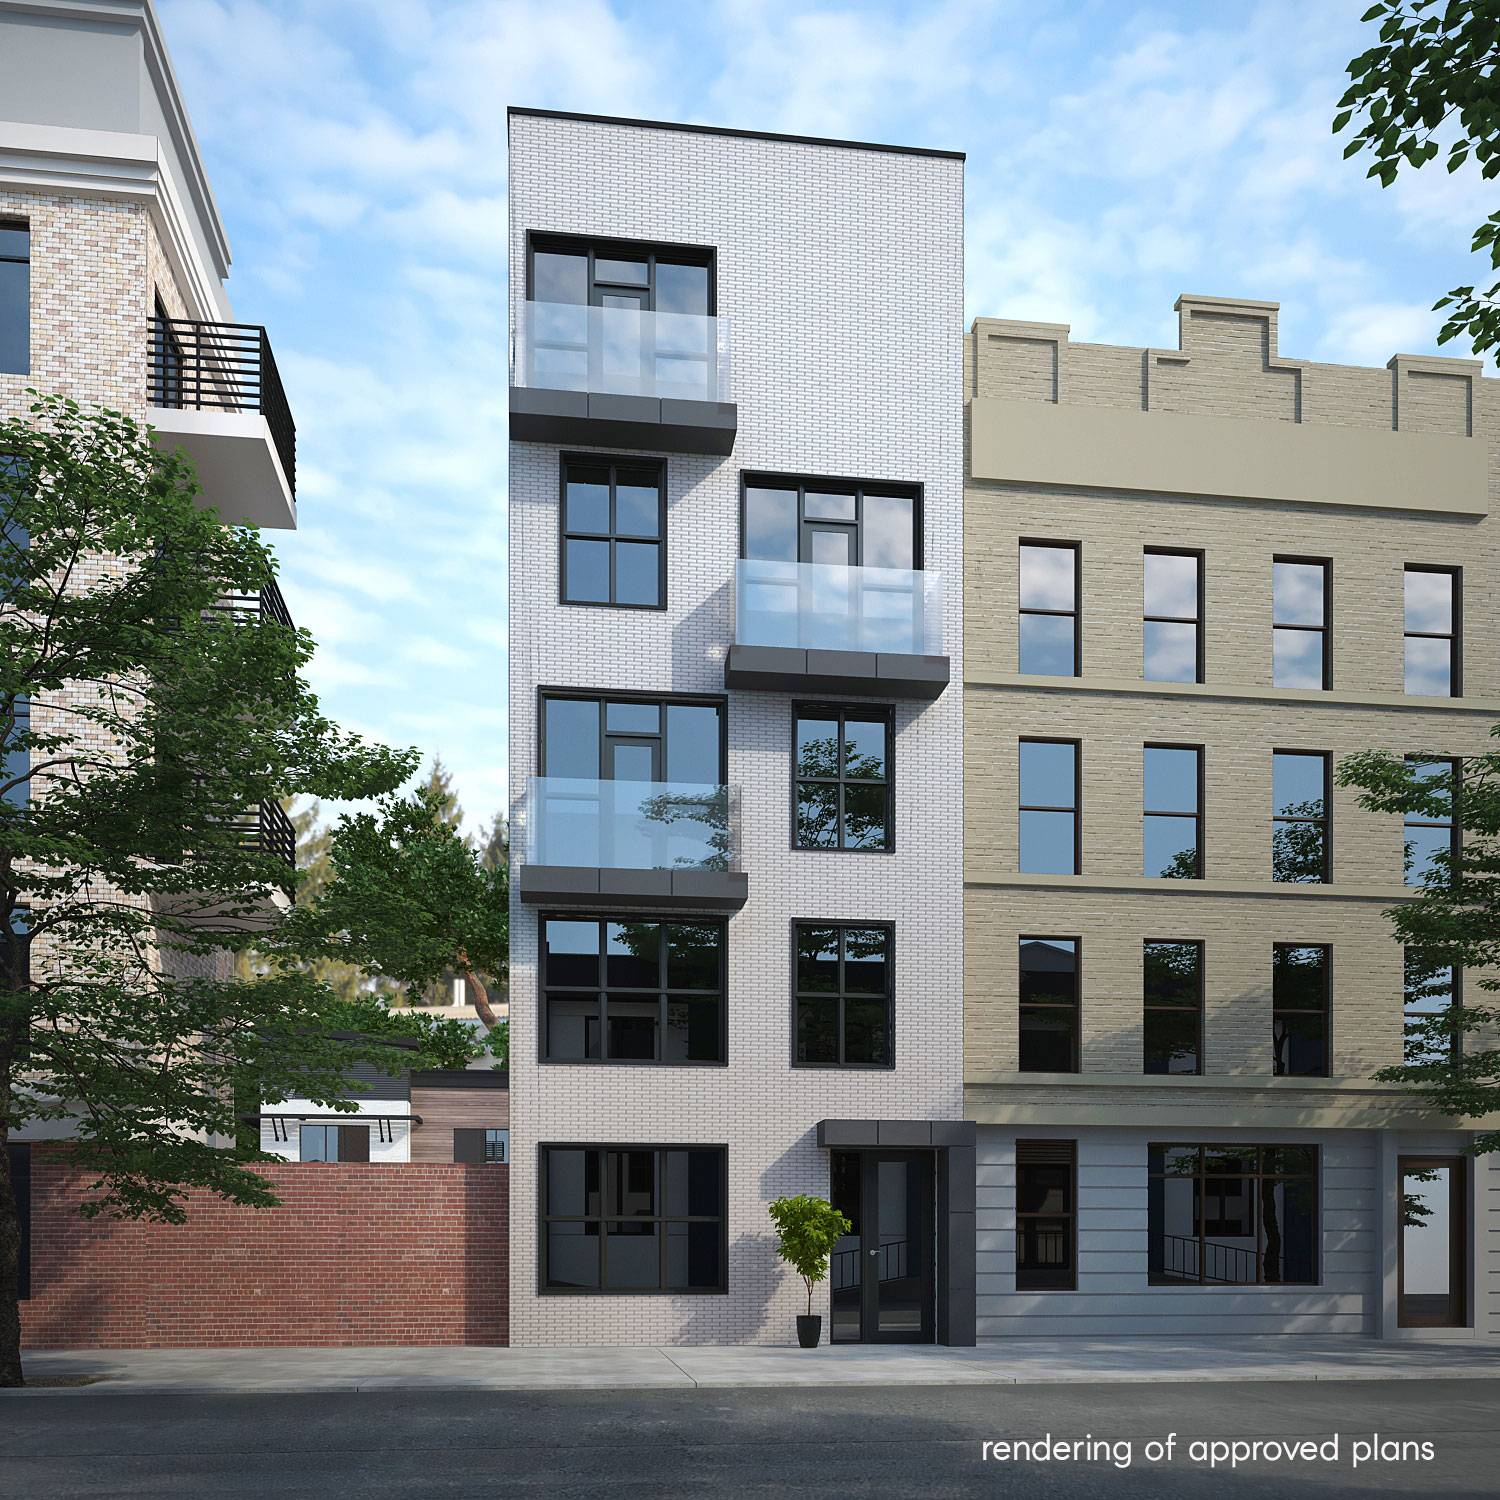 A vacant lot located in prime Bed Stuy with APPROVED PLANS for an 8 unit condominium building just steps away from Von King Park.